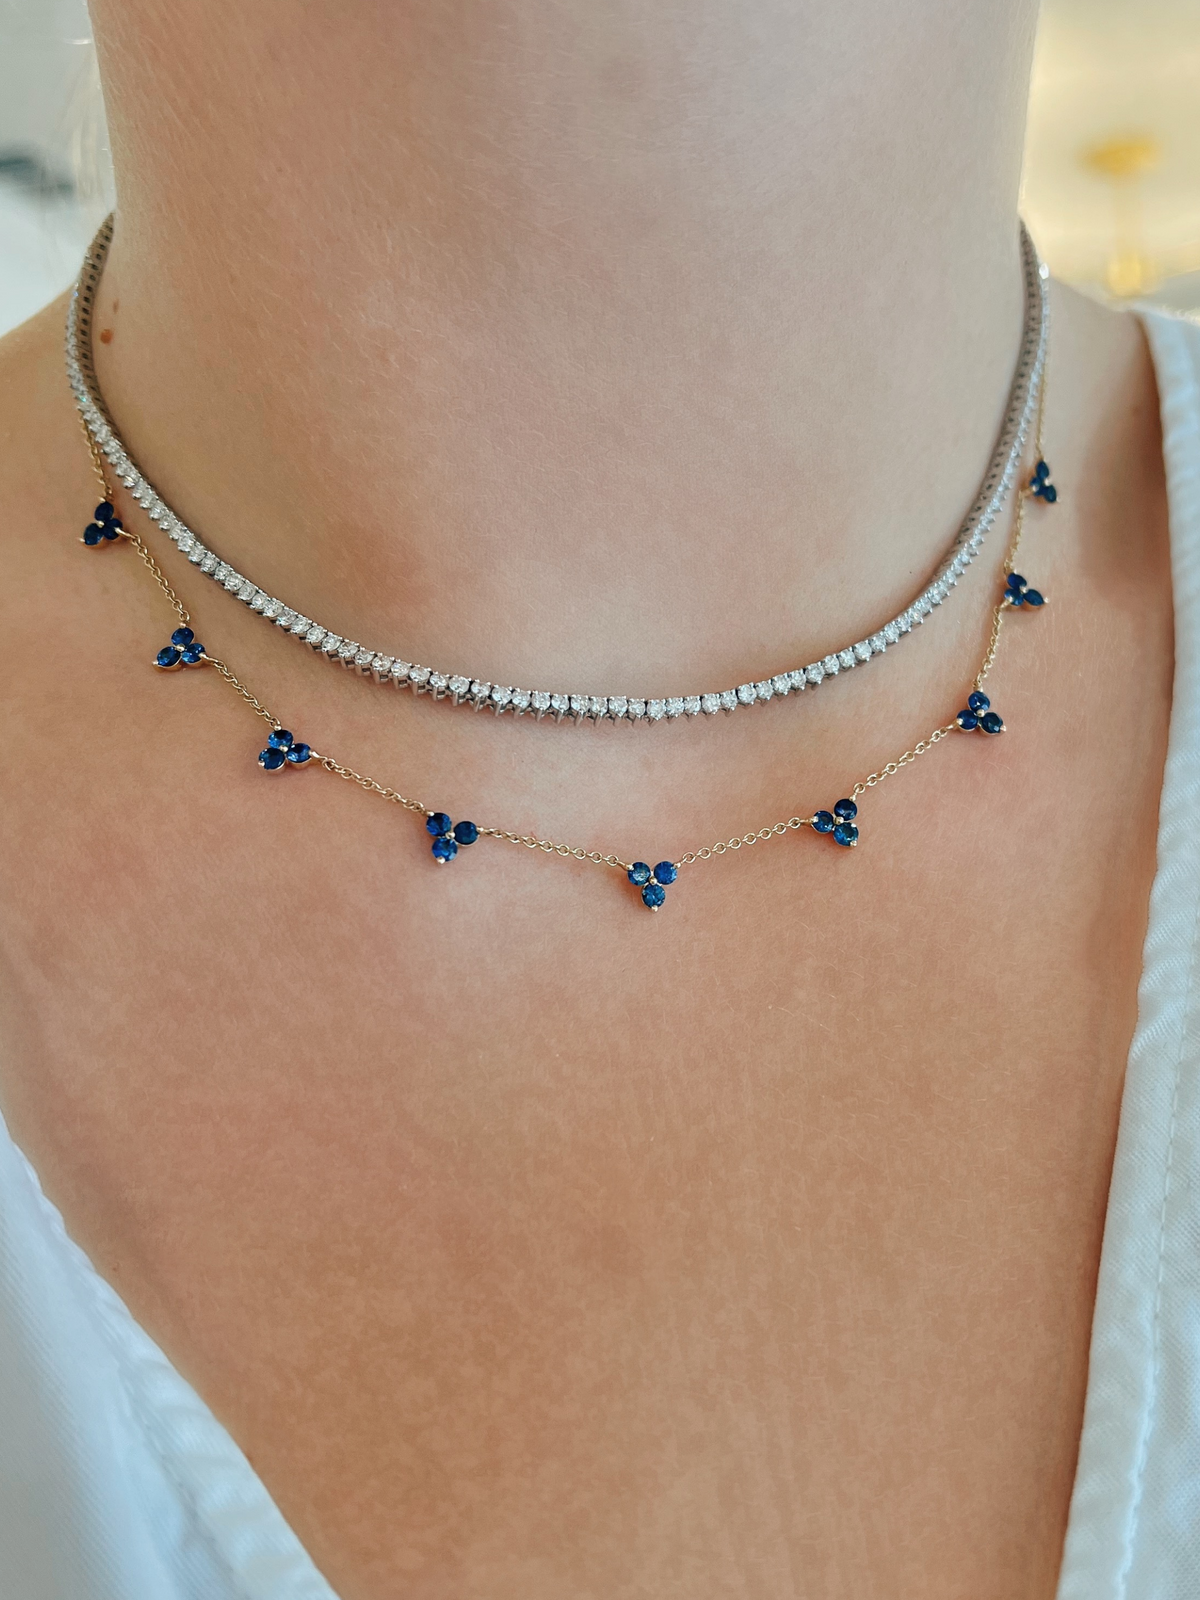 Blue sapphire necklace layered with diamond tennis necklace